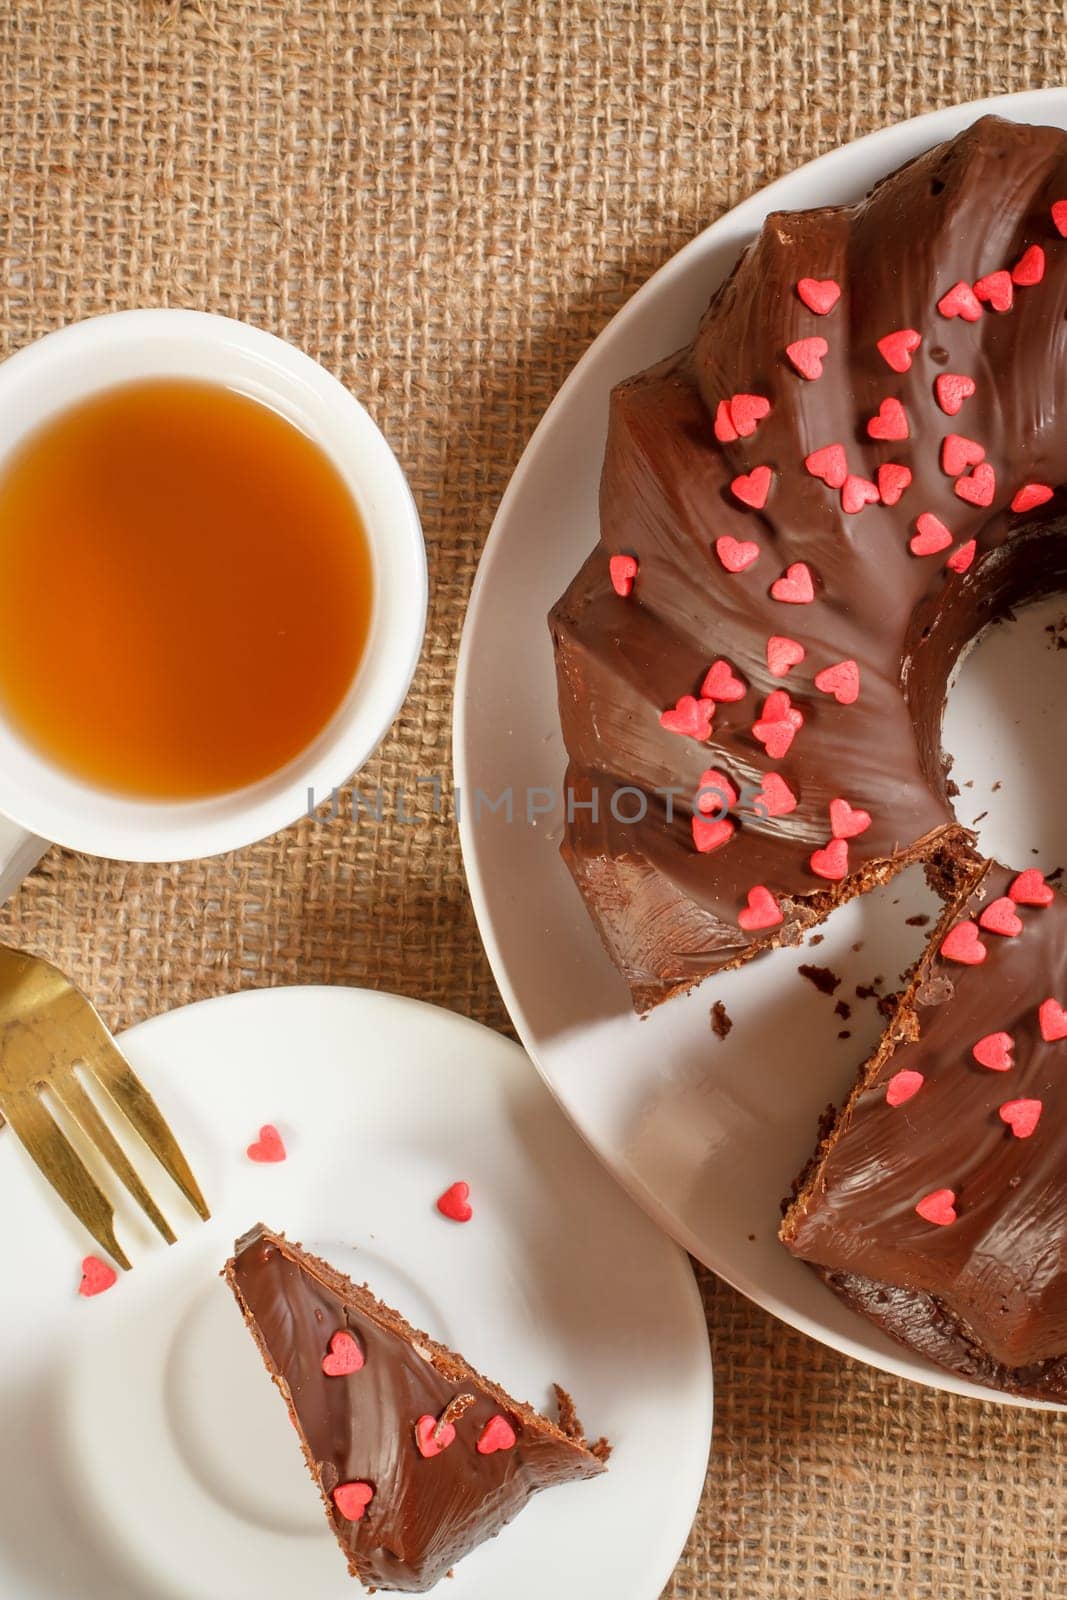 Homemade chocolate cake decorated with small caramel hearts and cup of tea. by mvg6894